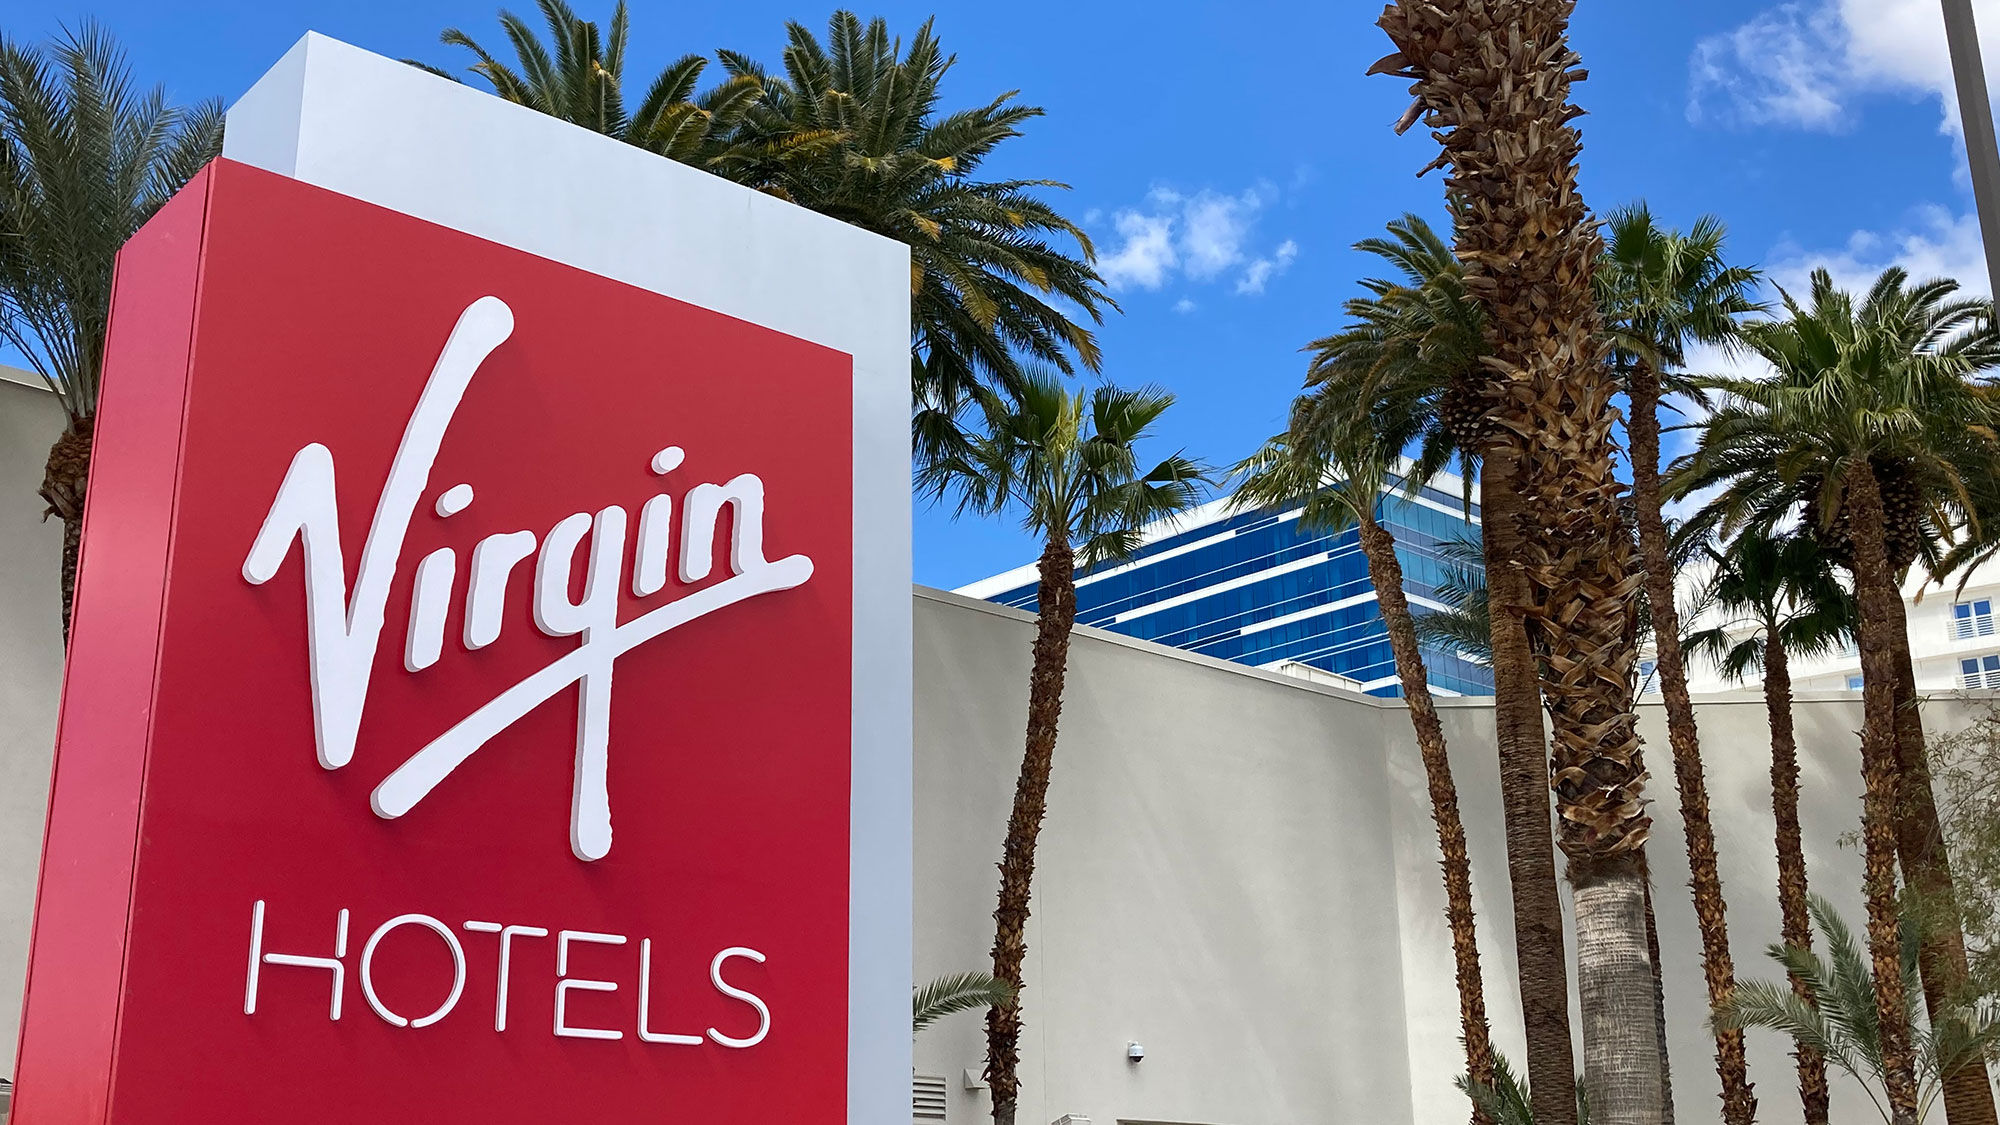 Virgin Hotels wants to expand into resort destinations: Travel Weekly